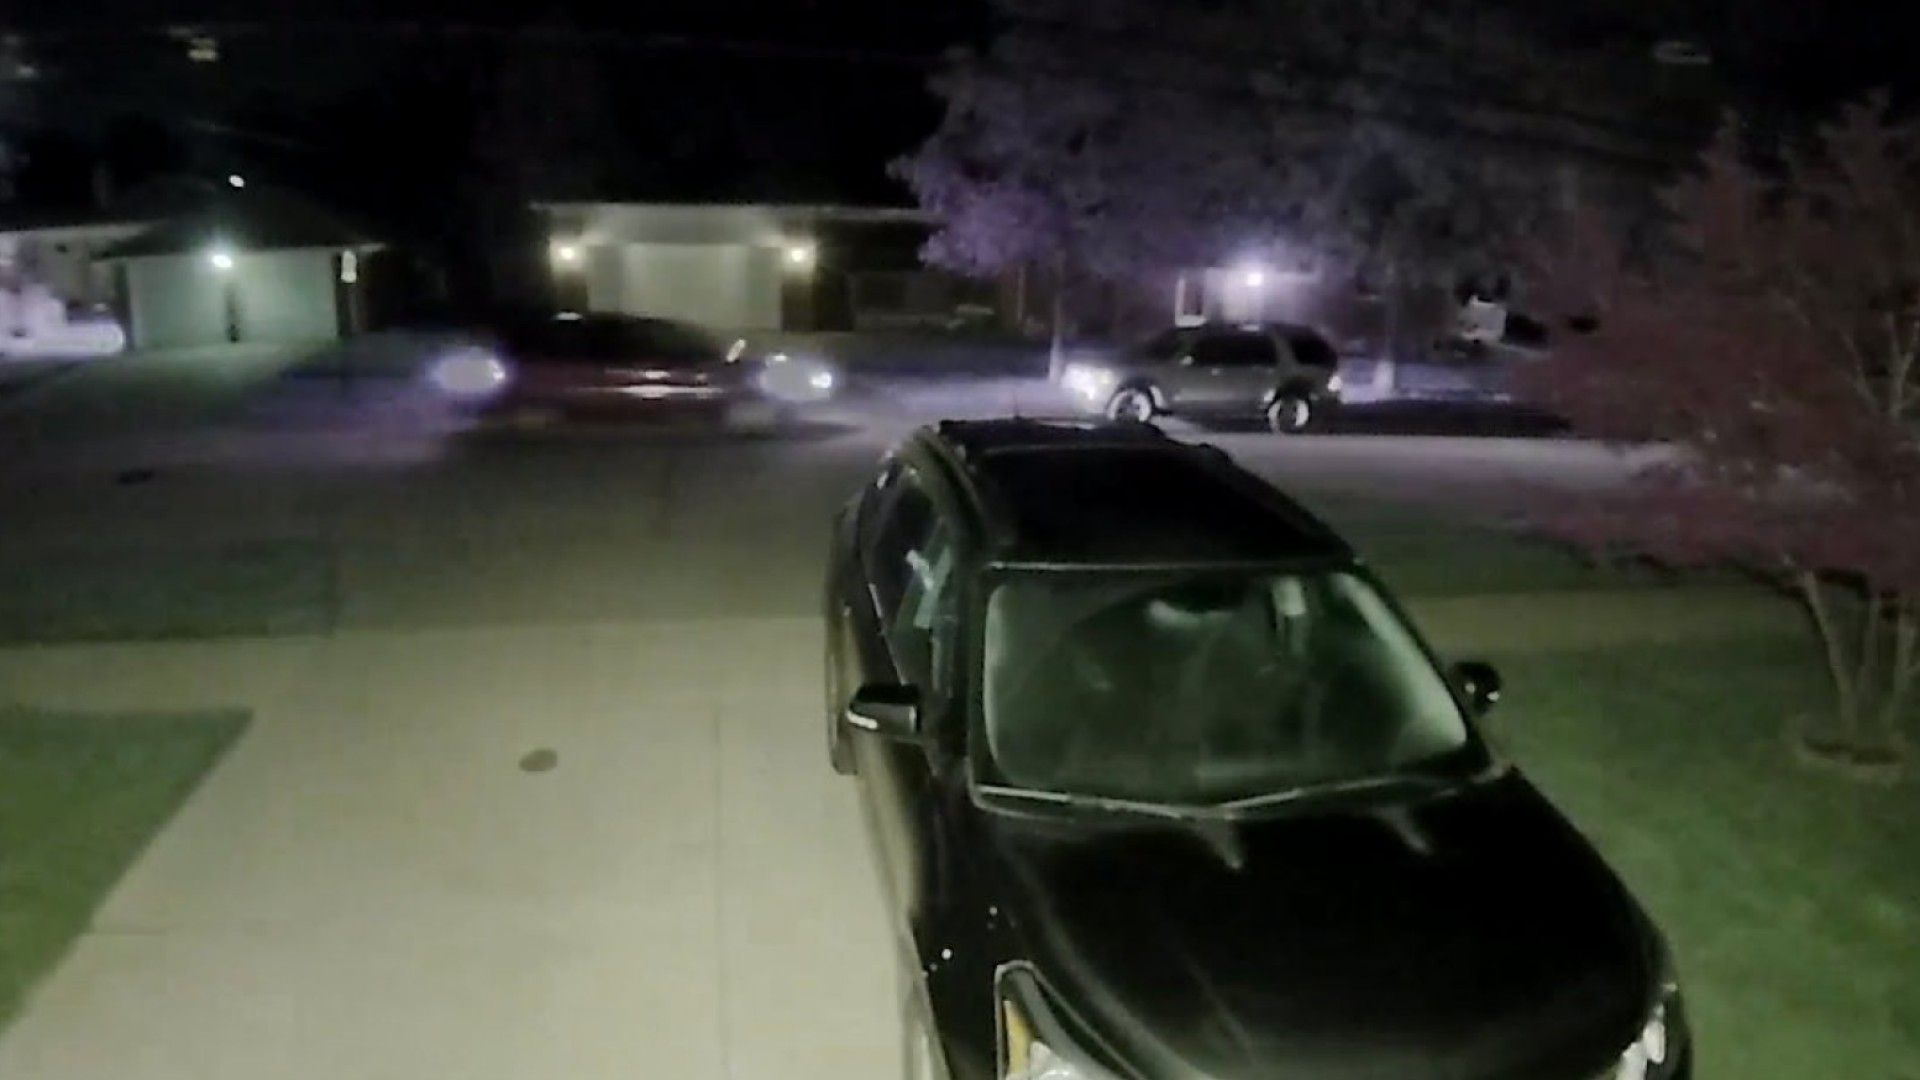 Doorbell cameras show car full of people driving around looking for  unlocked cars